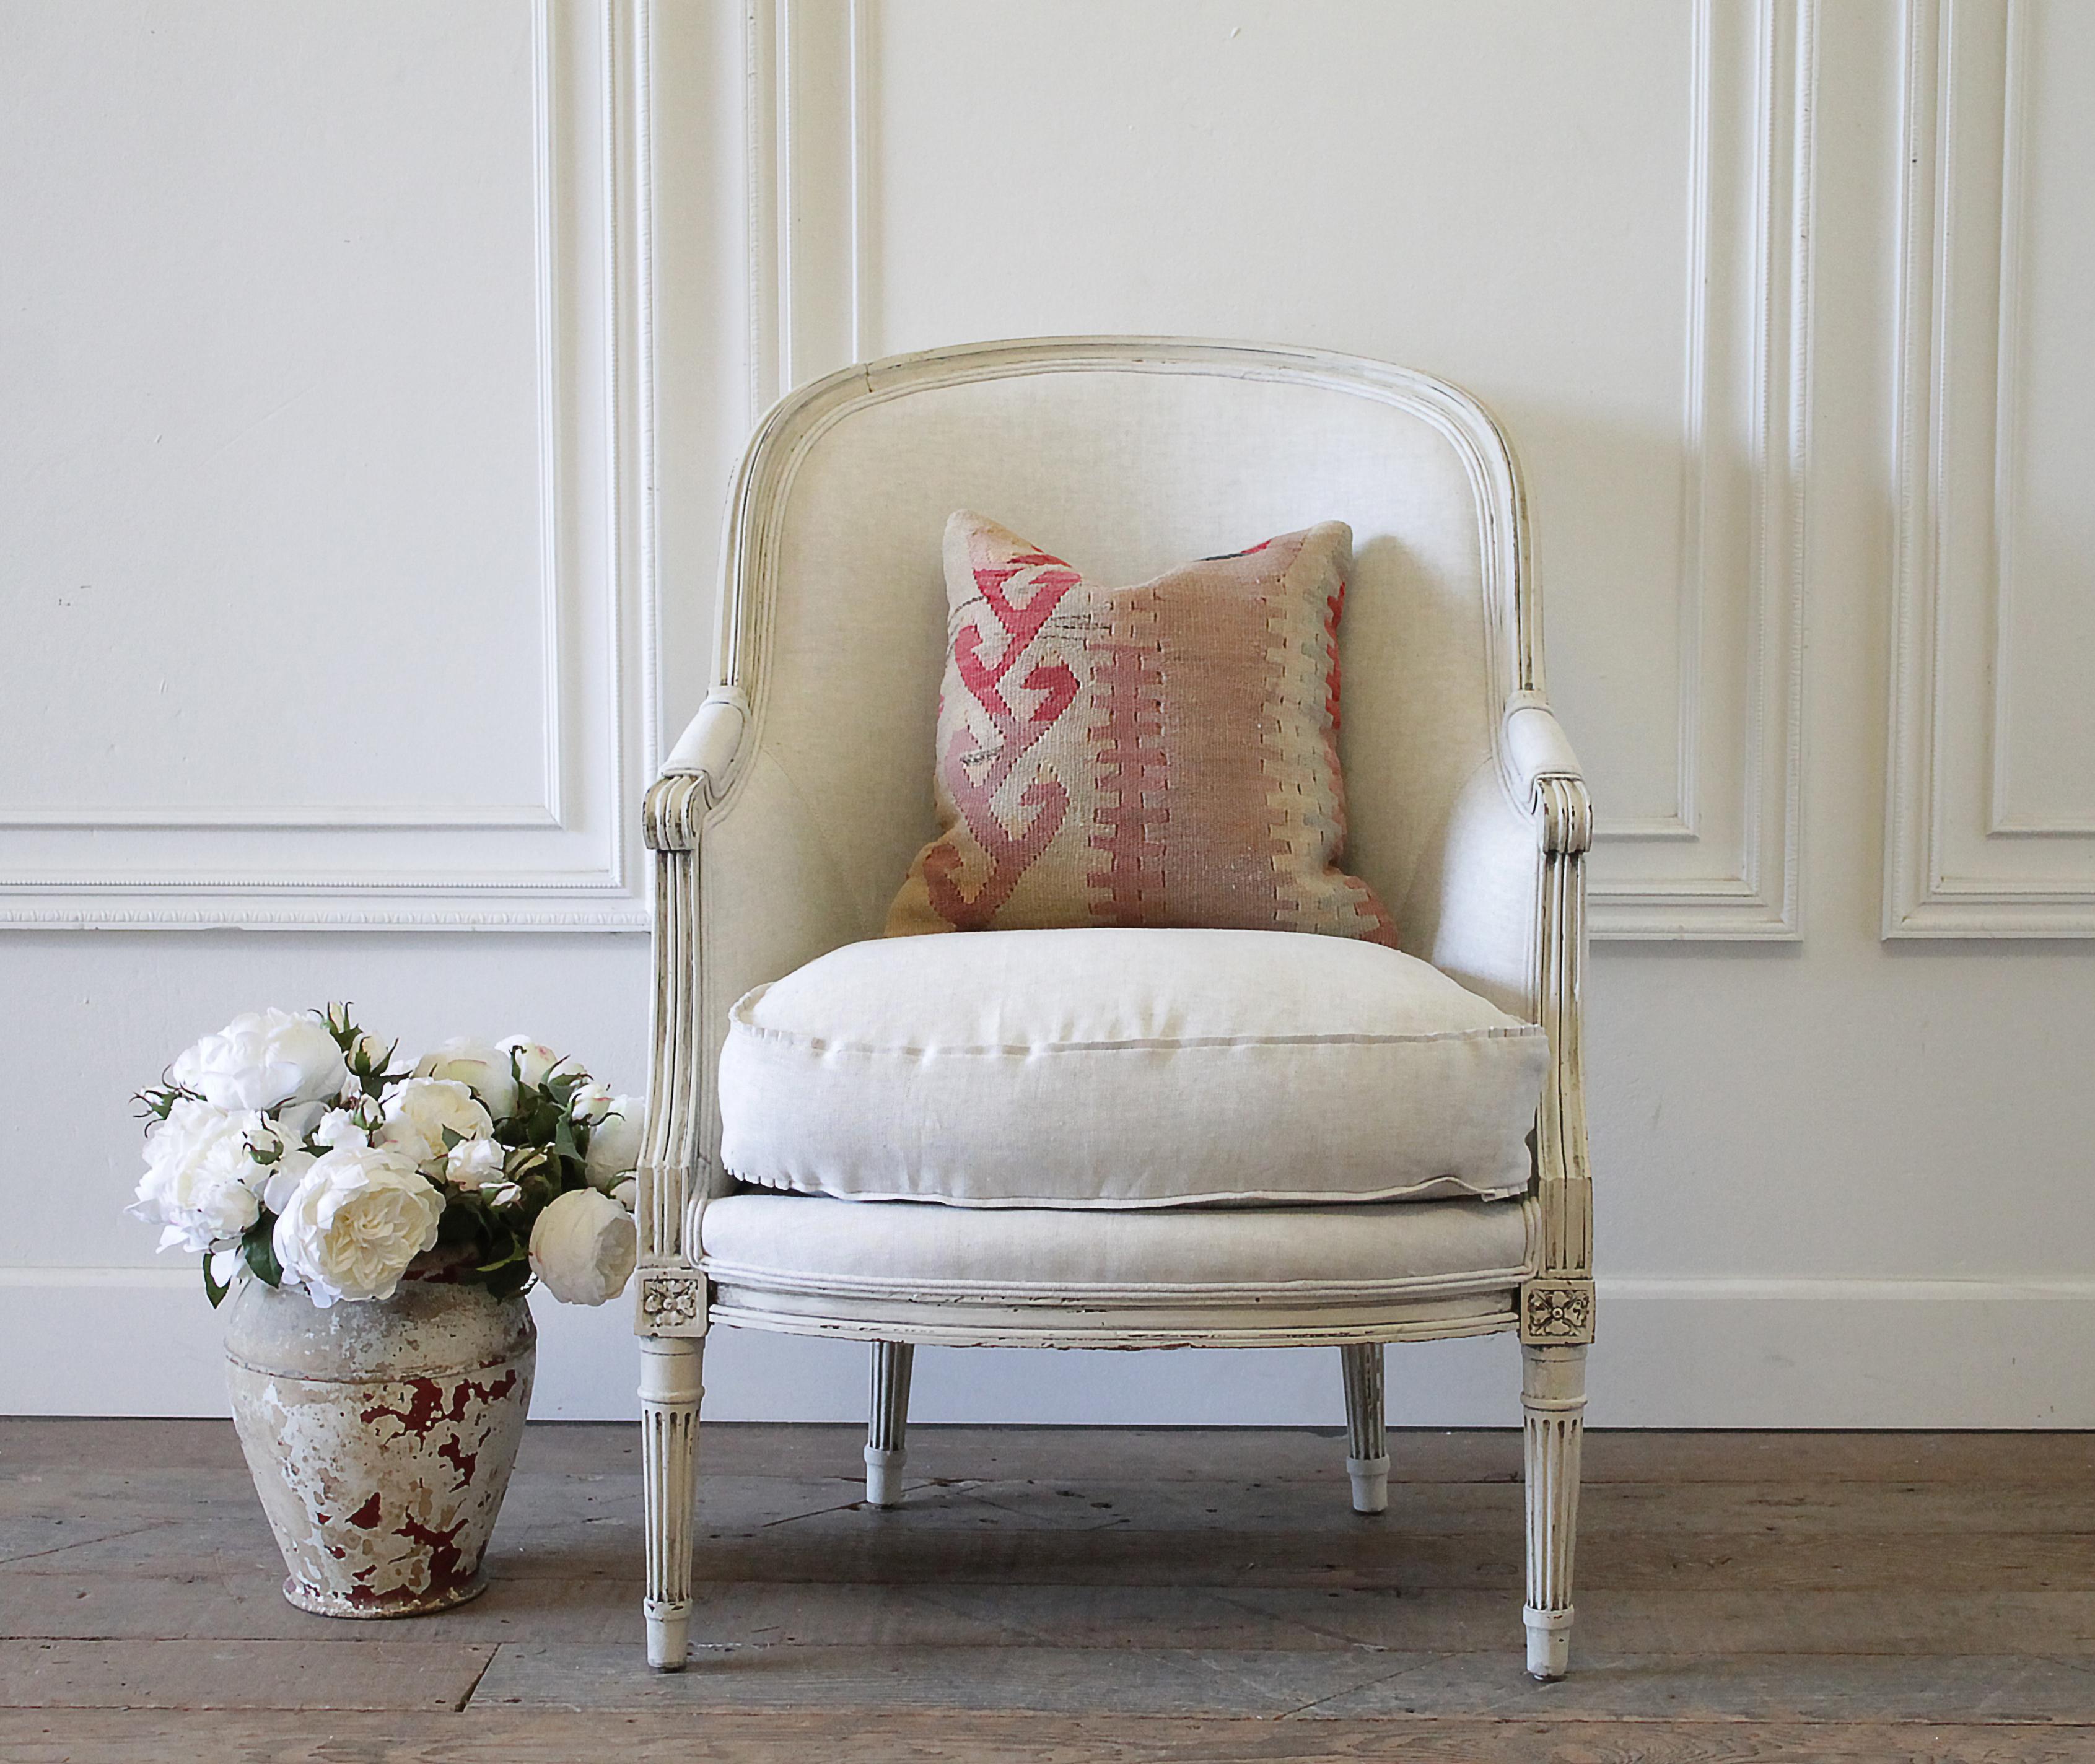 20th century Louis XVI style painted French bergère chair in natural linen frame is painted in our oyster white paint, with natural aged patina and distressed edges. Louis XVI style with fluted legs, and rounded curved back. We reupholstered this